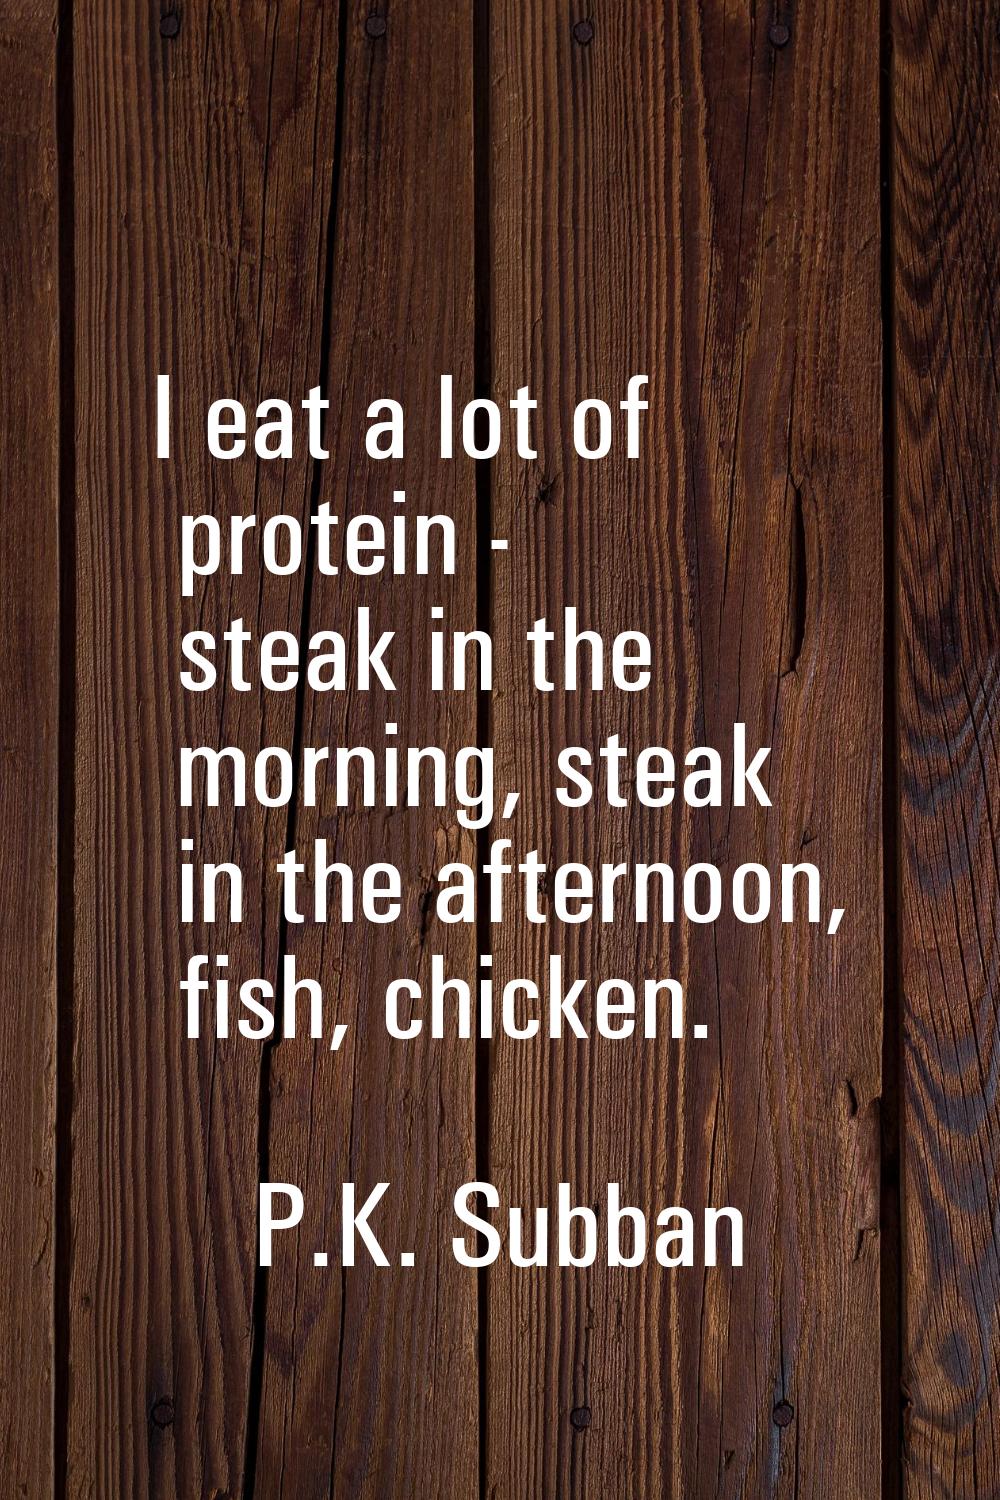 I eat a lot of protein - steak in the morning, steak in the afternoon, fish, chicken.